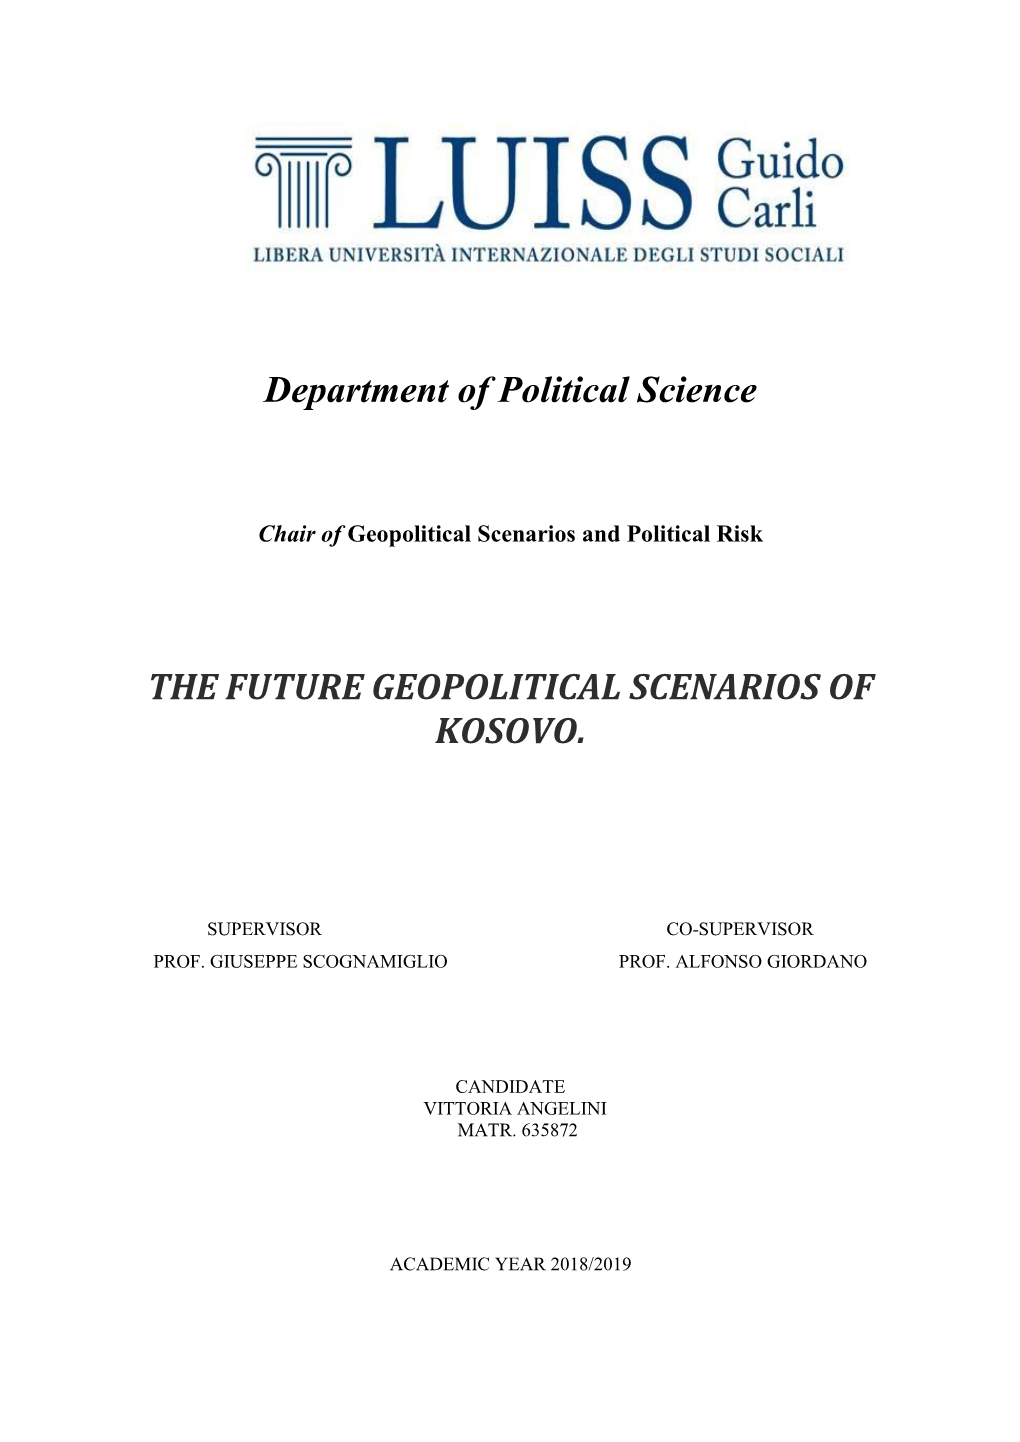 Department of Political Science the FUTURE GEOPOLITICAL